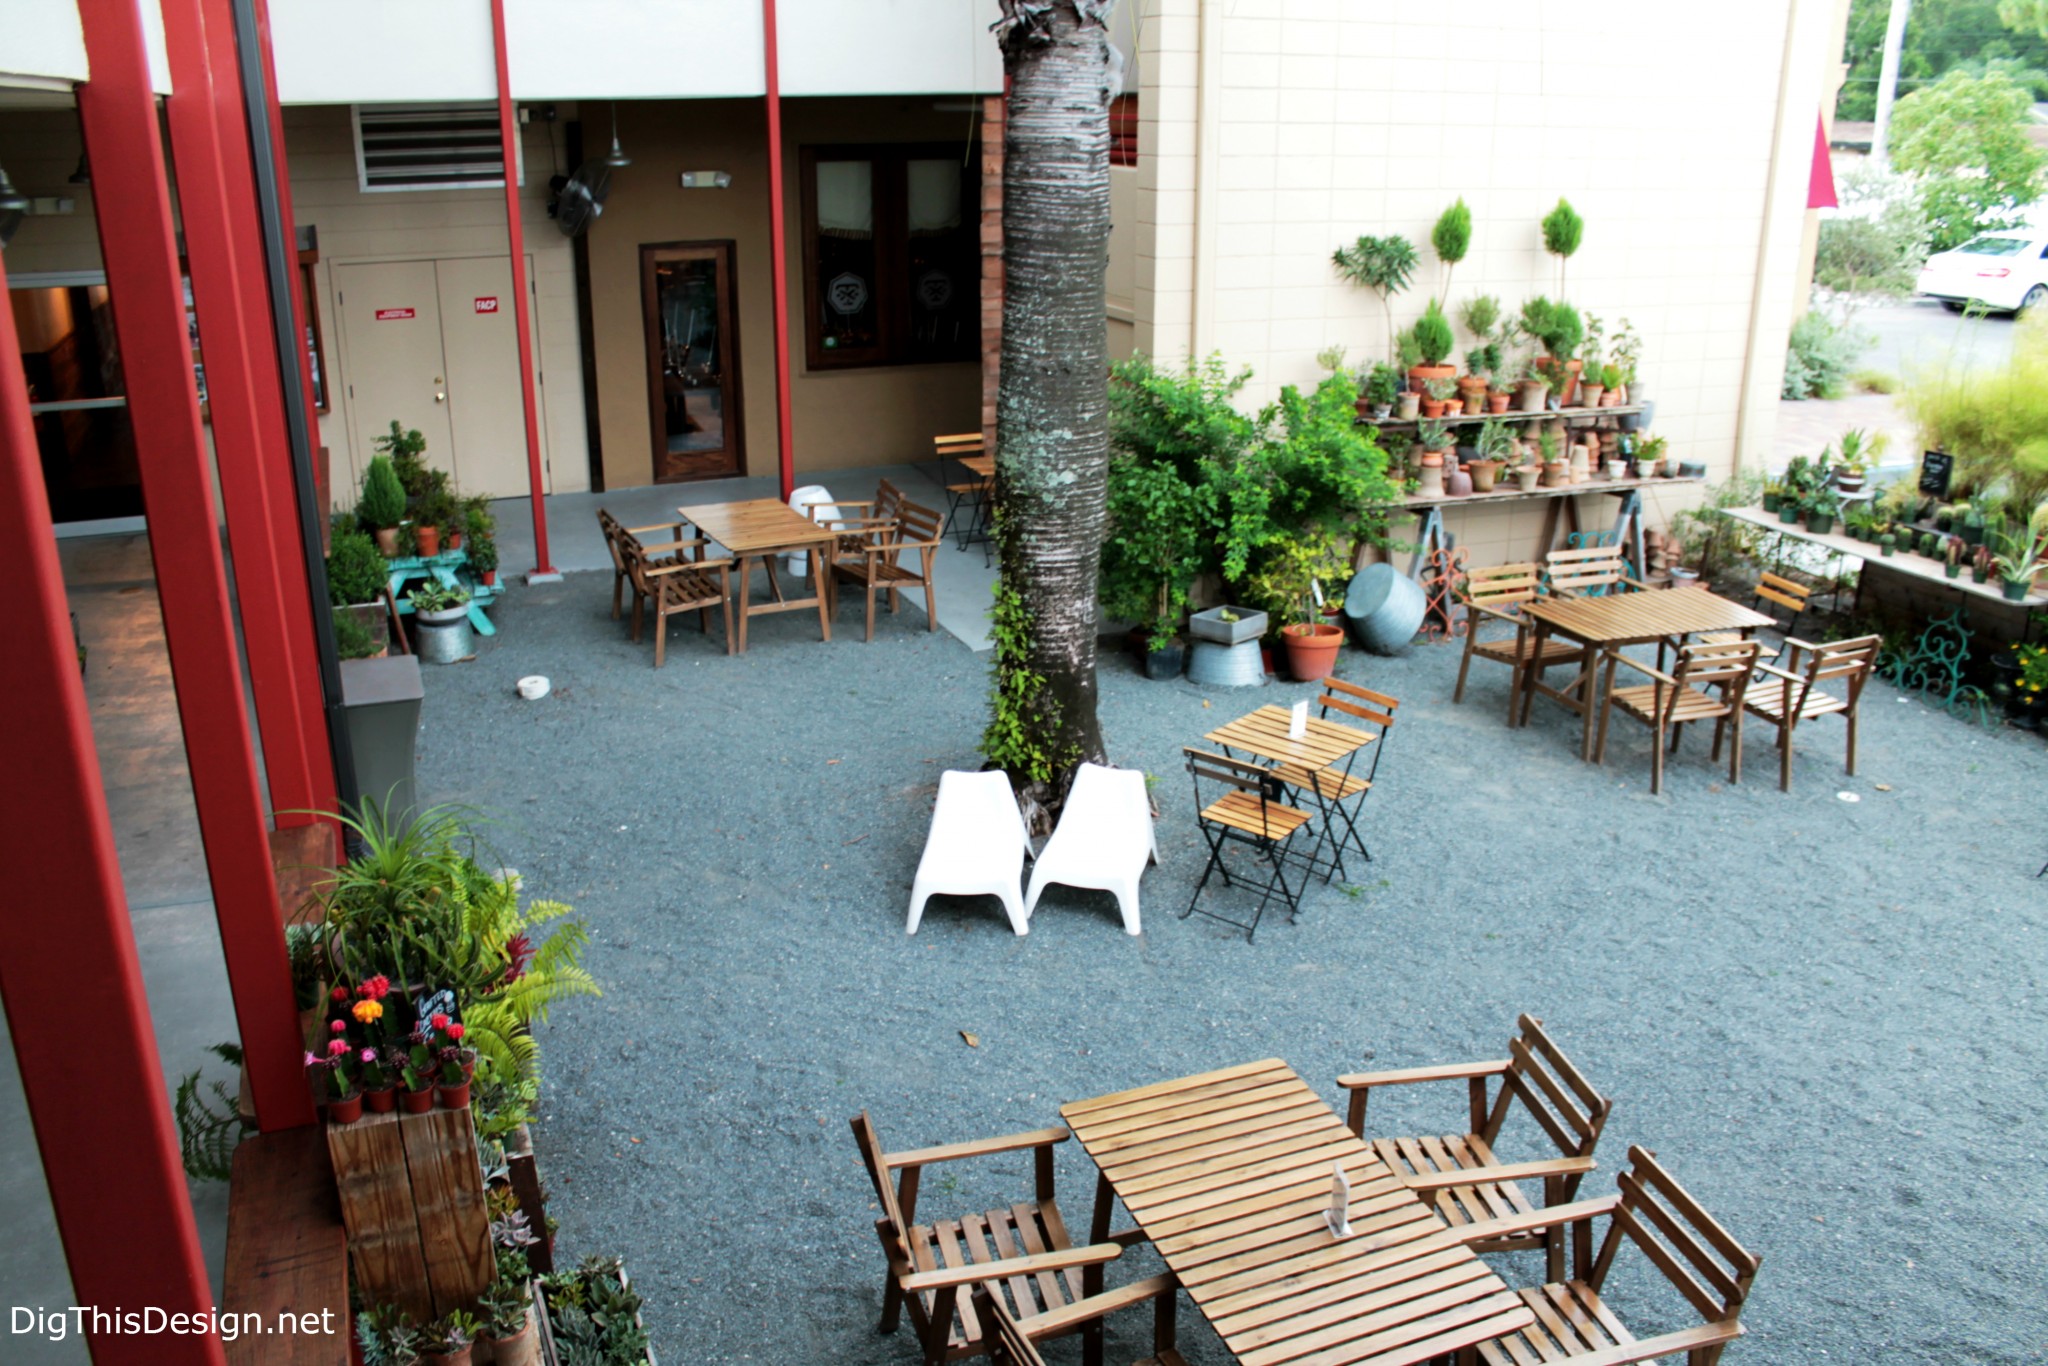 Courtyard at East End Market